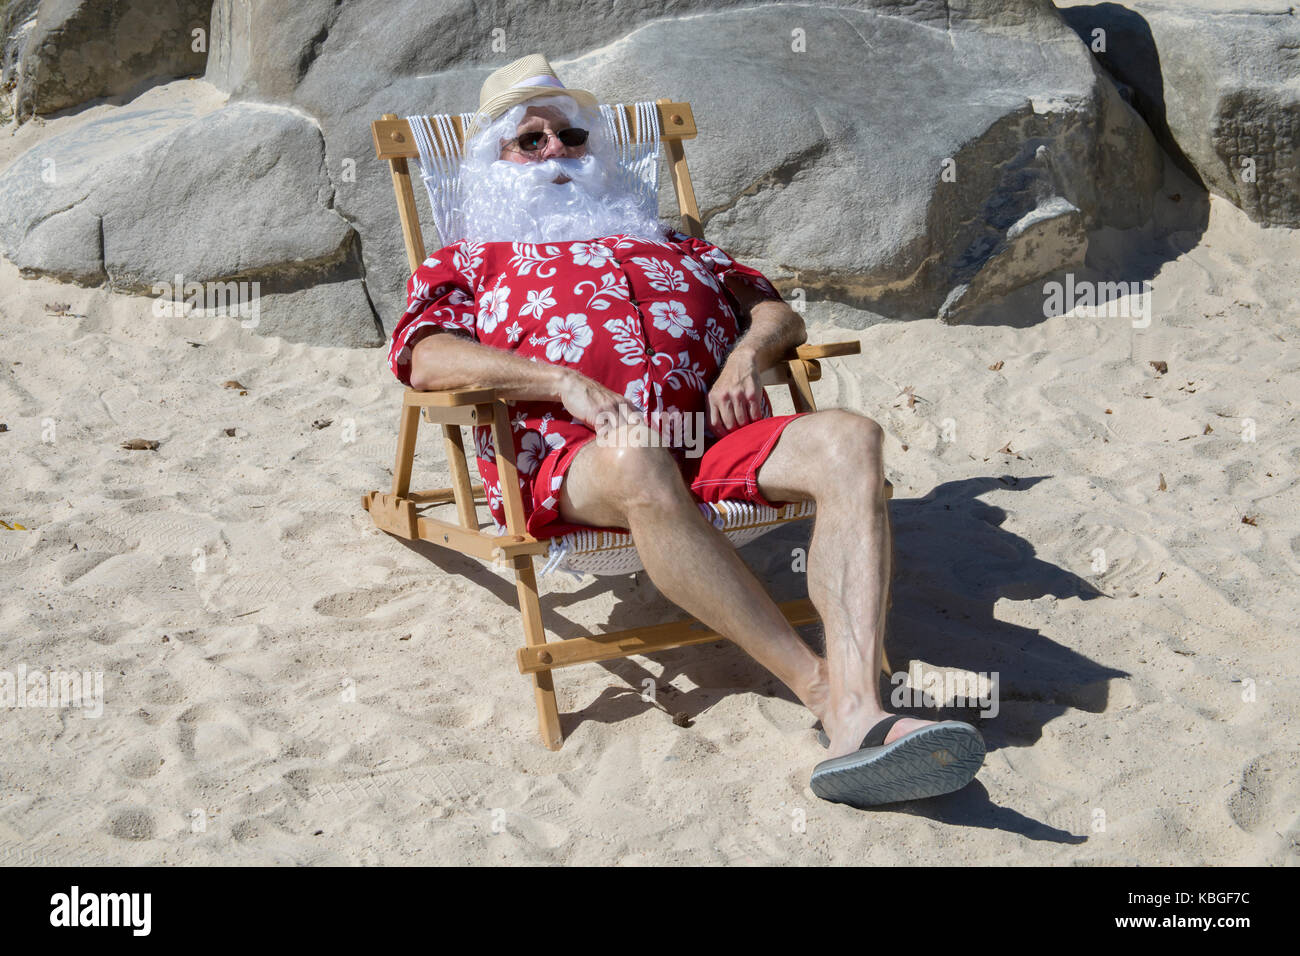 Santa Claus in red swimming trunks ans Hawaiian shirt lounging on sandy  beach with straw hat and sunglasses Stock Photo - Alamy